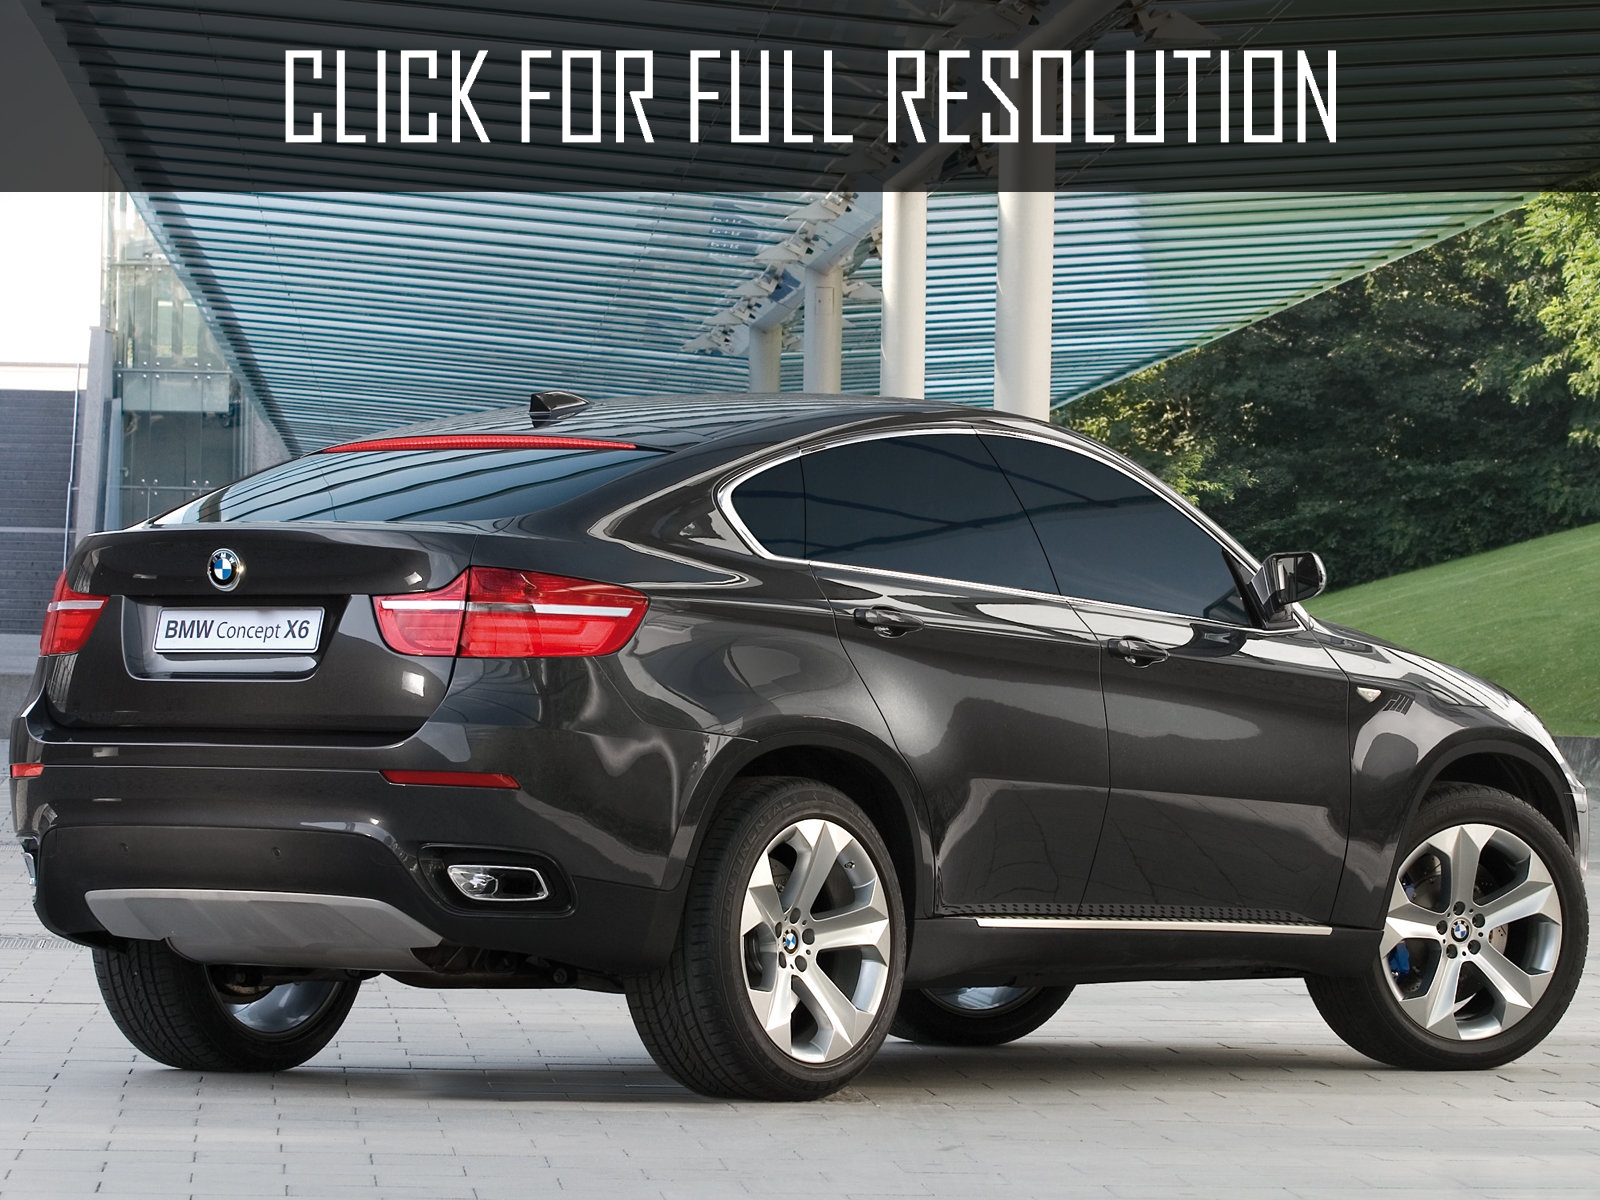 Bmw Q6 amazing photo gallery, some information and specifications, as